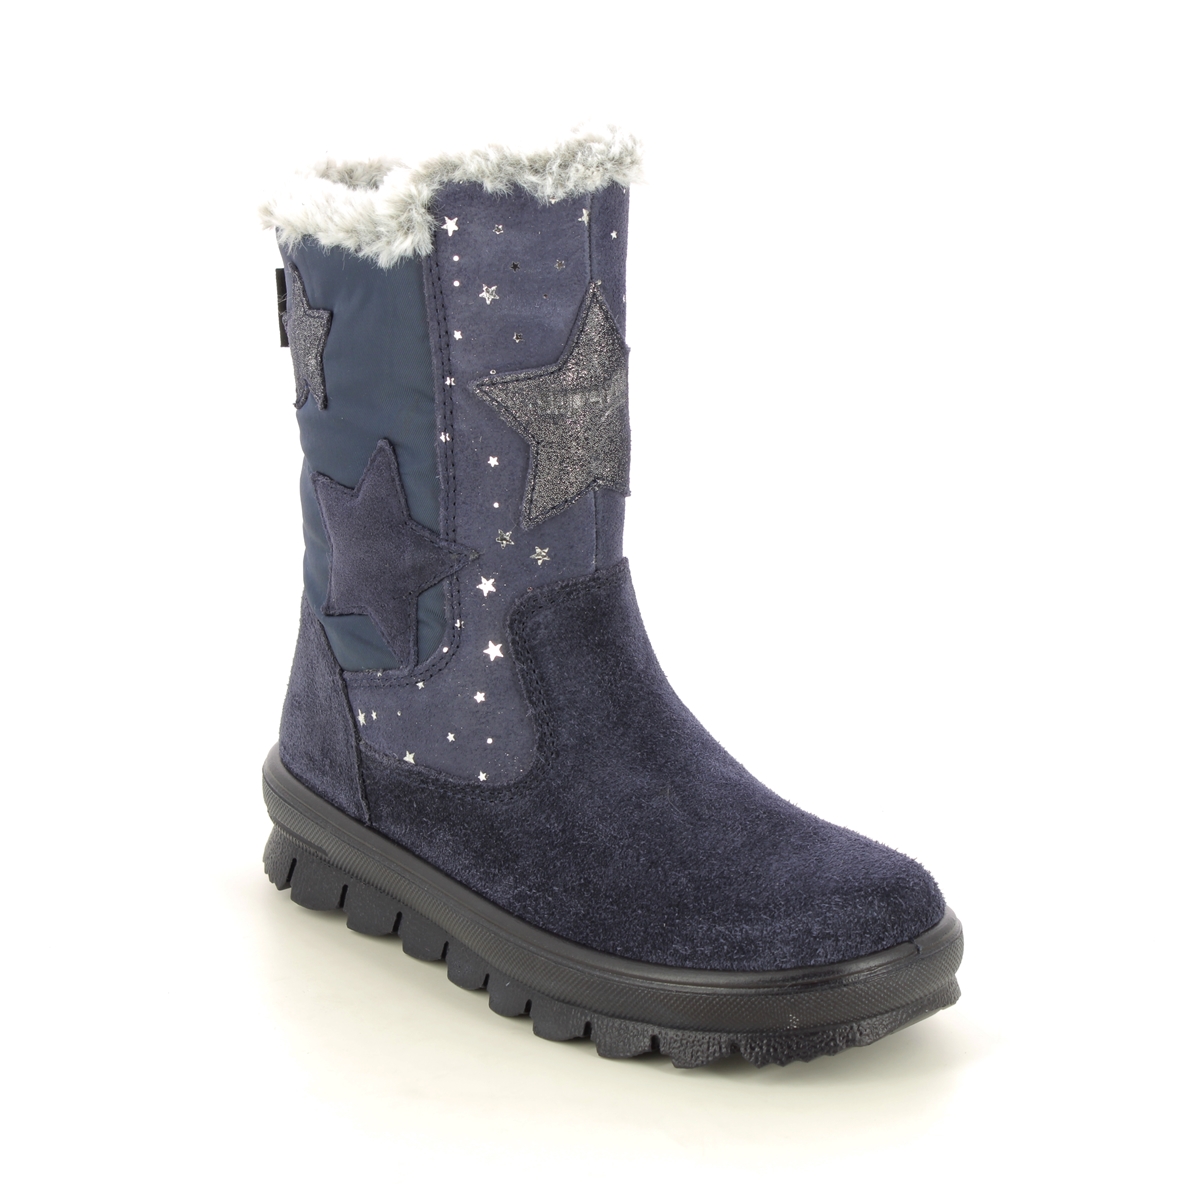 Superfit Flavia Star Gtx Navy Suede Kids Girls Boots 1000219-8000 In Size 33 In Plain Navy Suede For kids